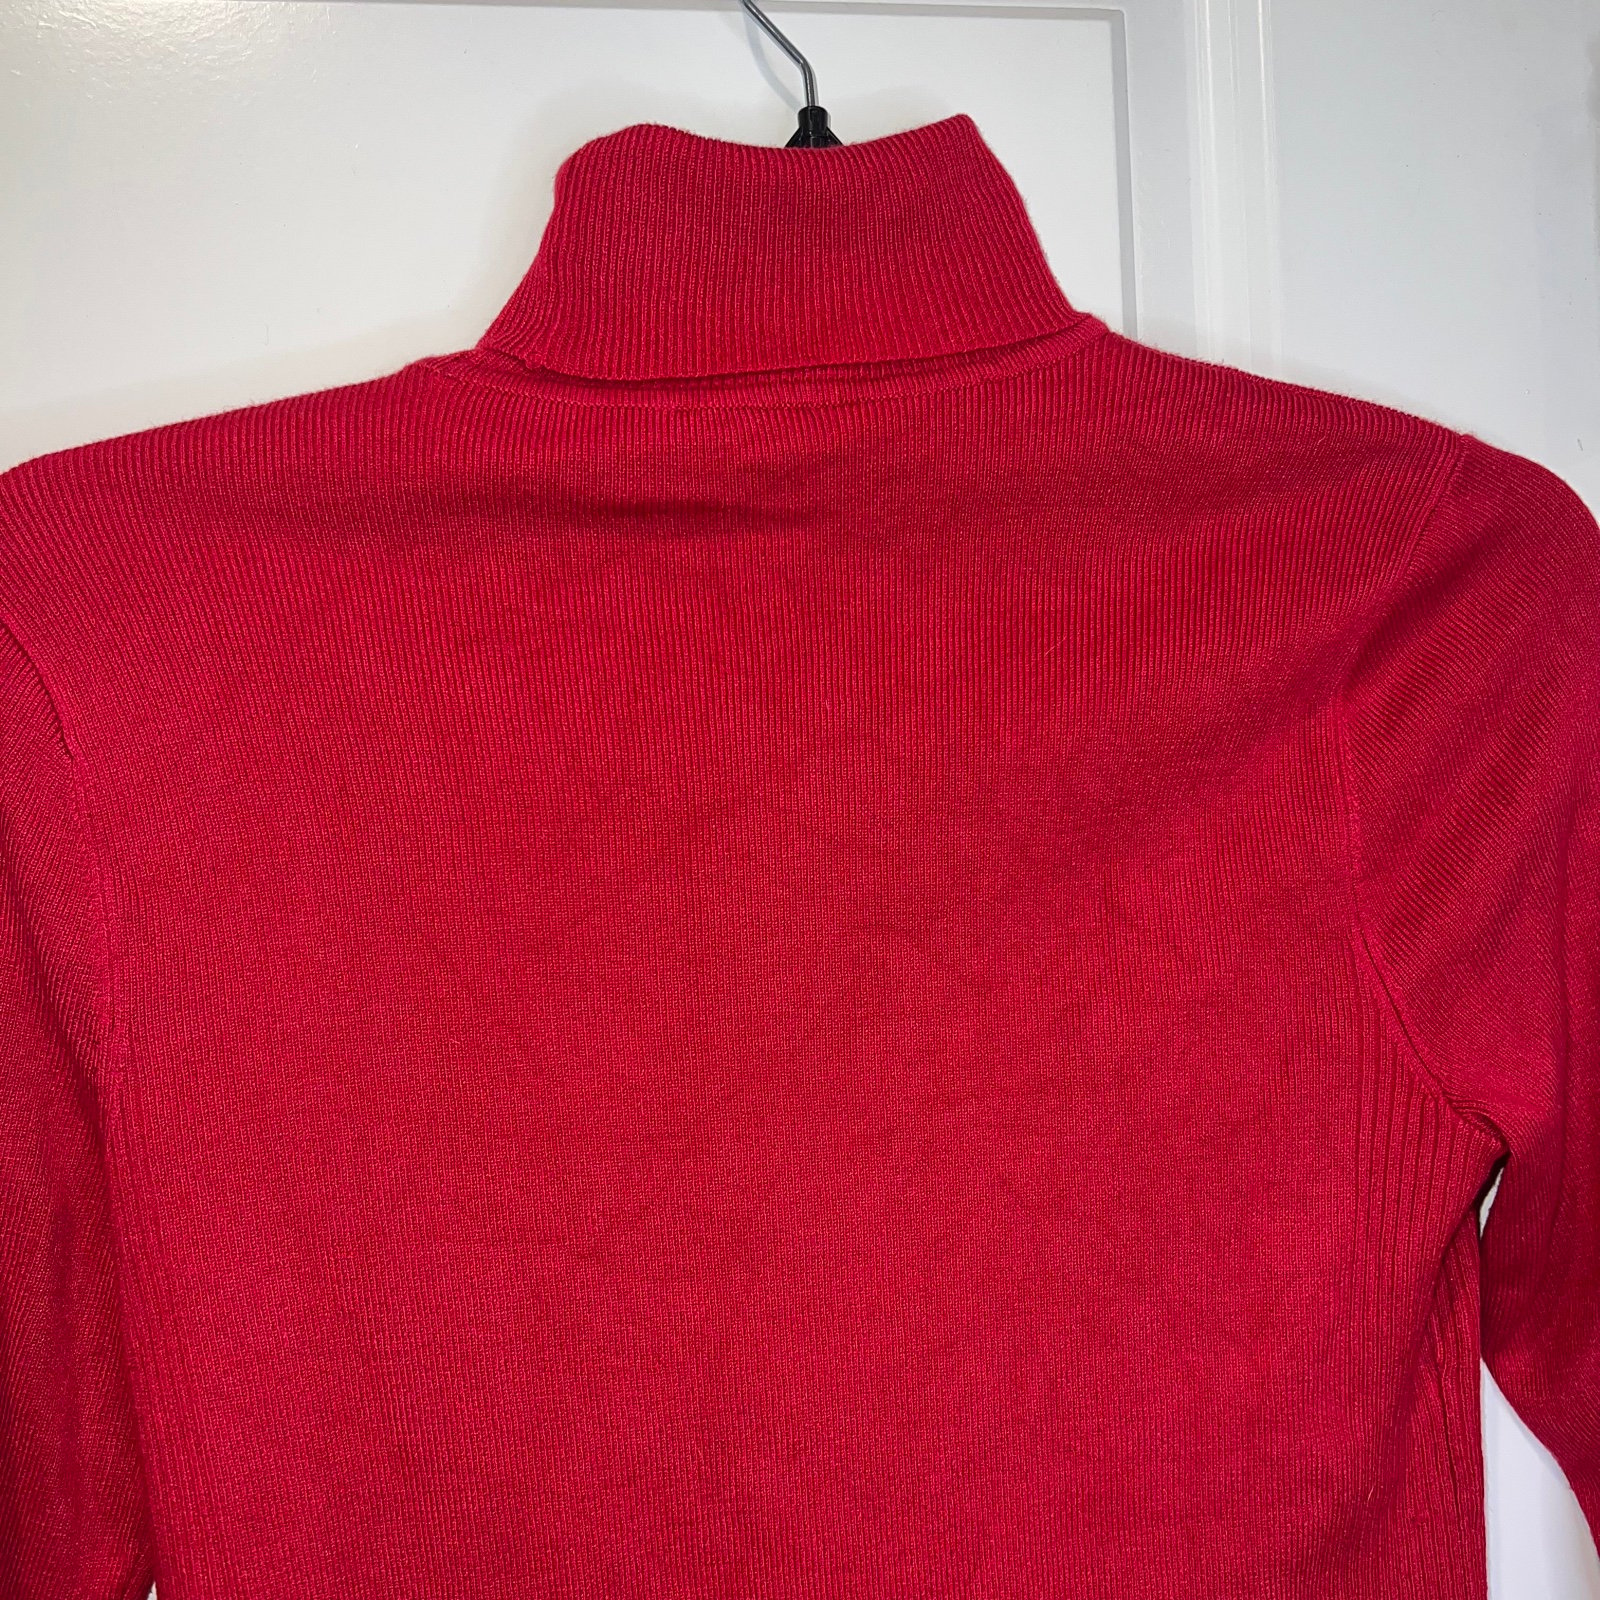 Personality Chicos Womens Red Turtleneck Sweater KvbaS0ToE US Outlet